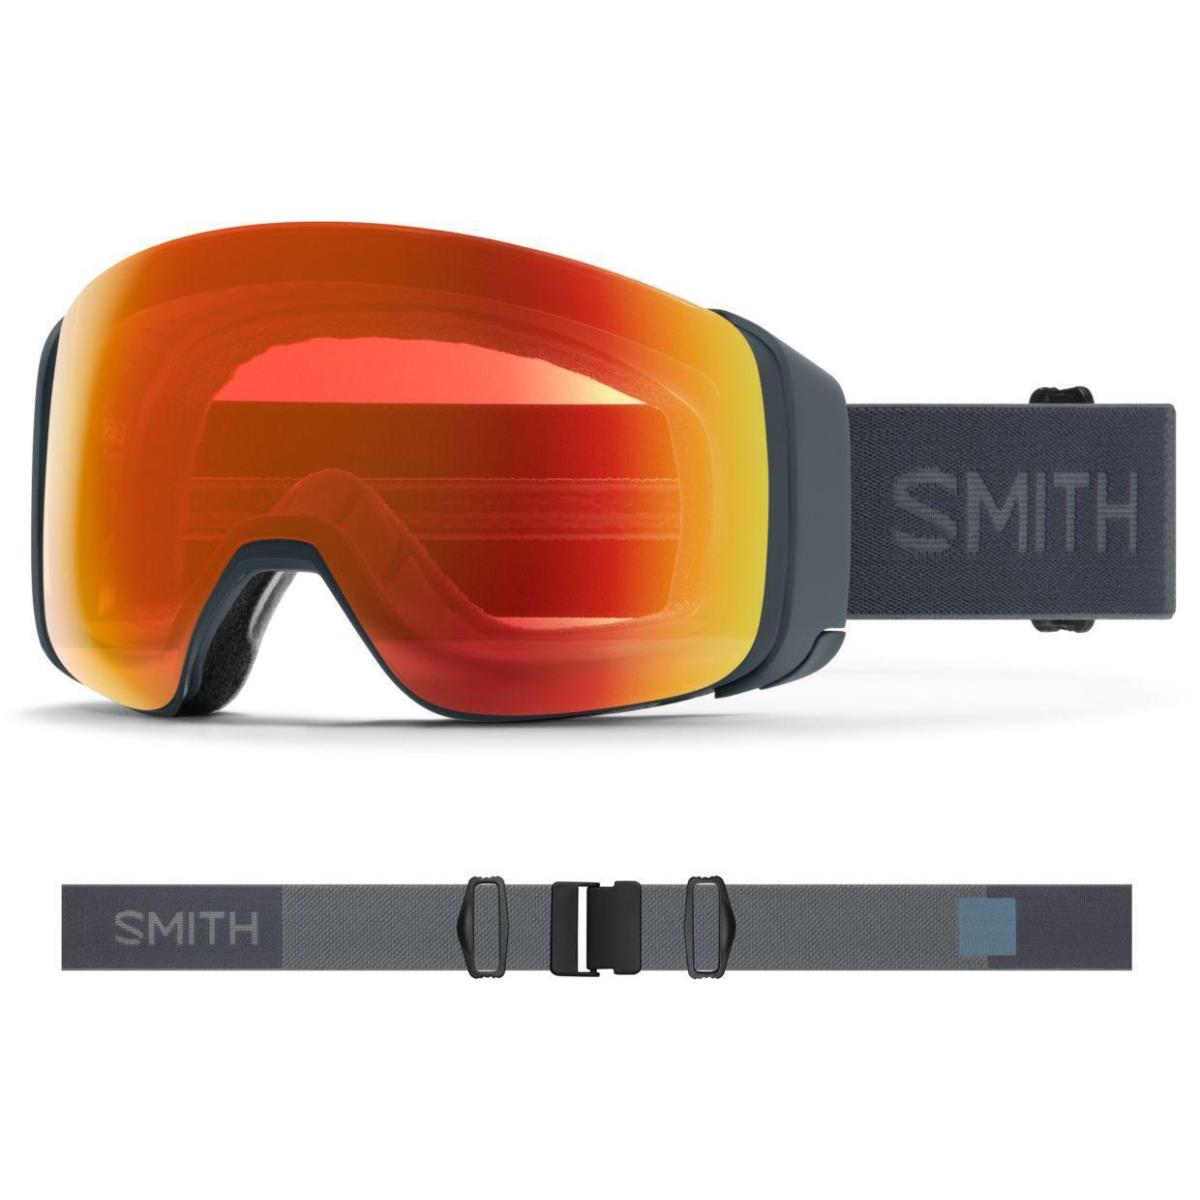 Smith 4D Mag Goggles Slate - Chromapop Everyday Red Mirror